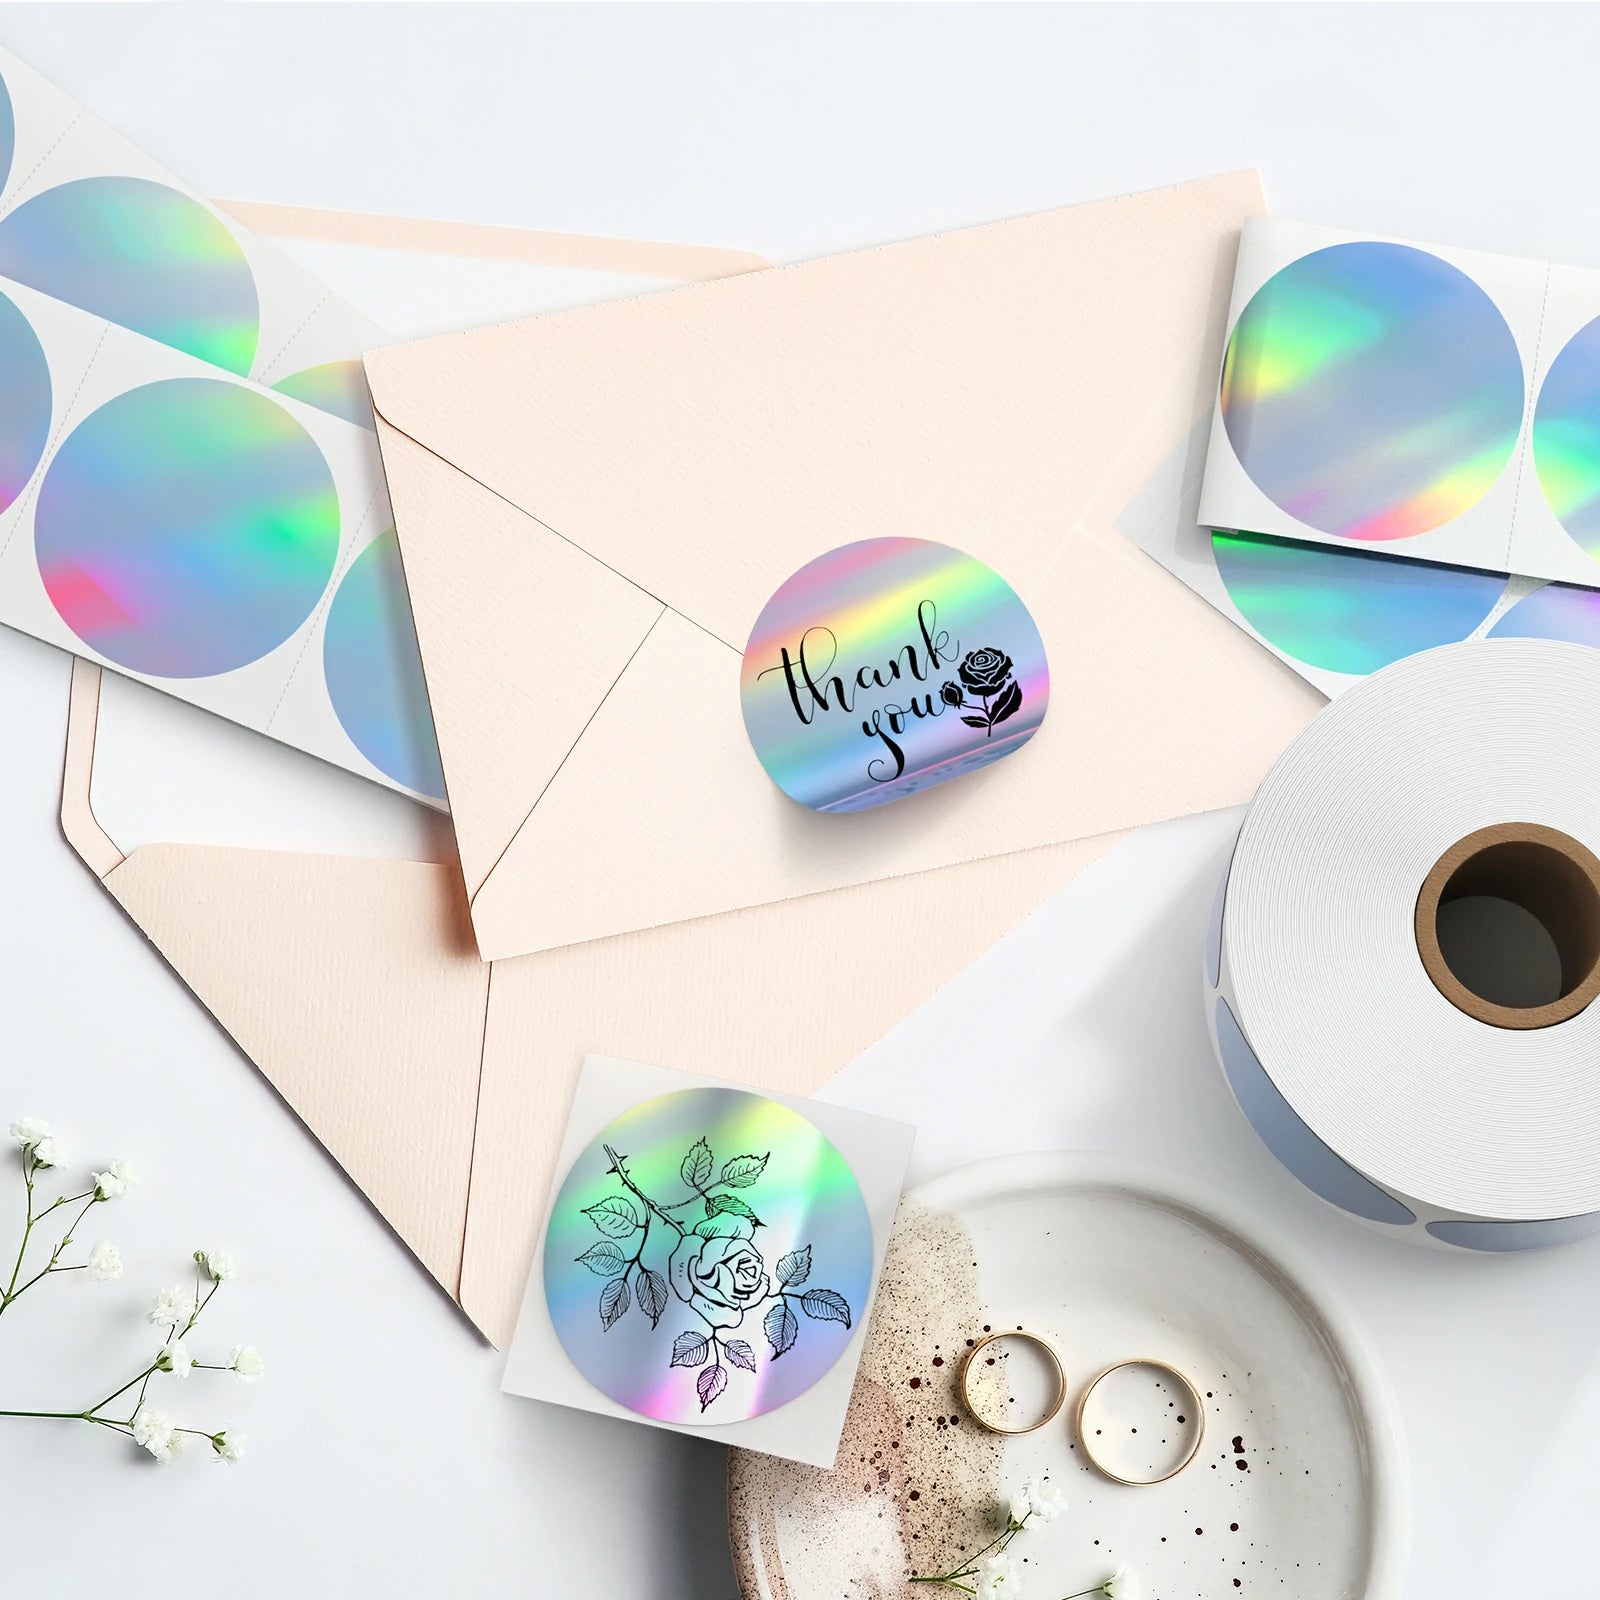 MUNBYN holographic silver round thermal labels are ideal to be used as envelope seals.